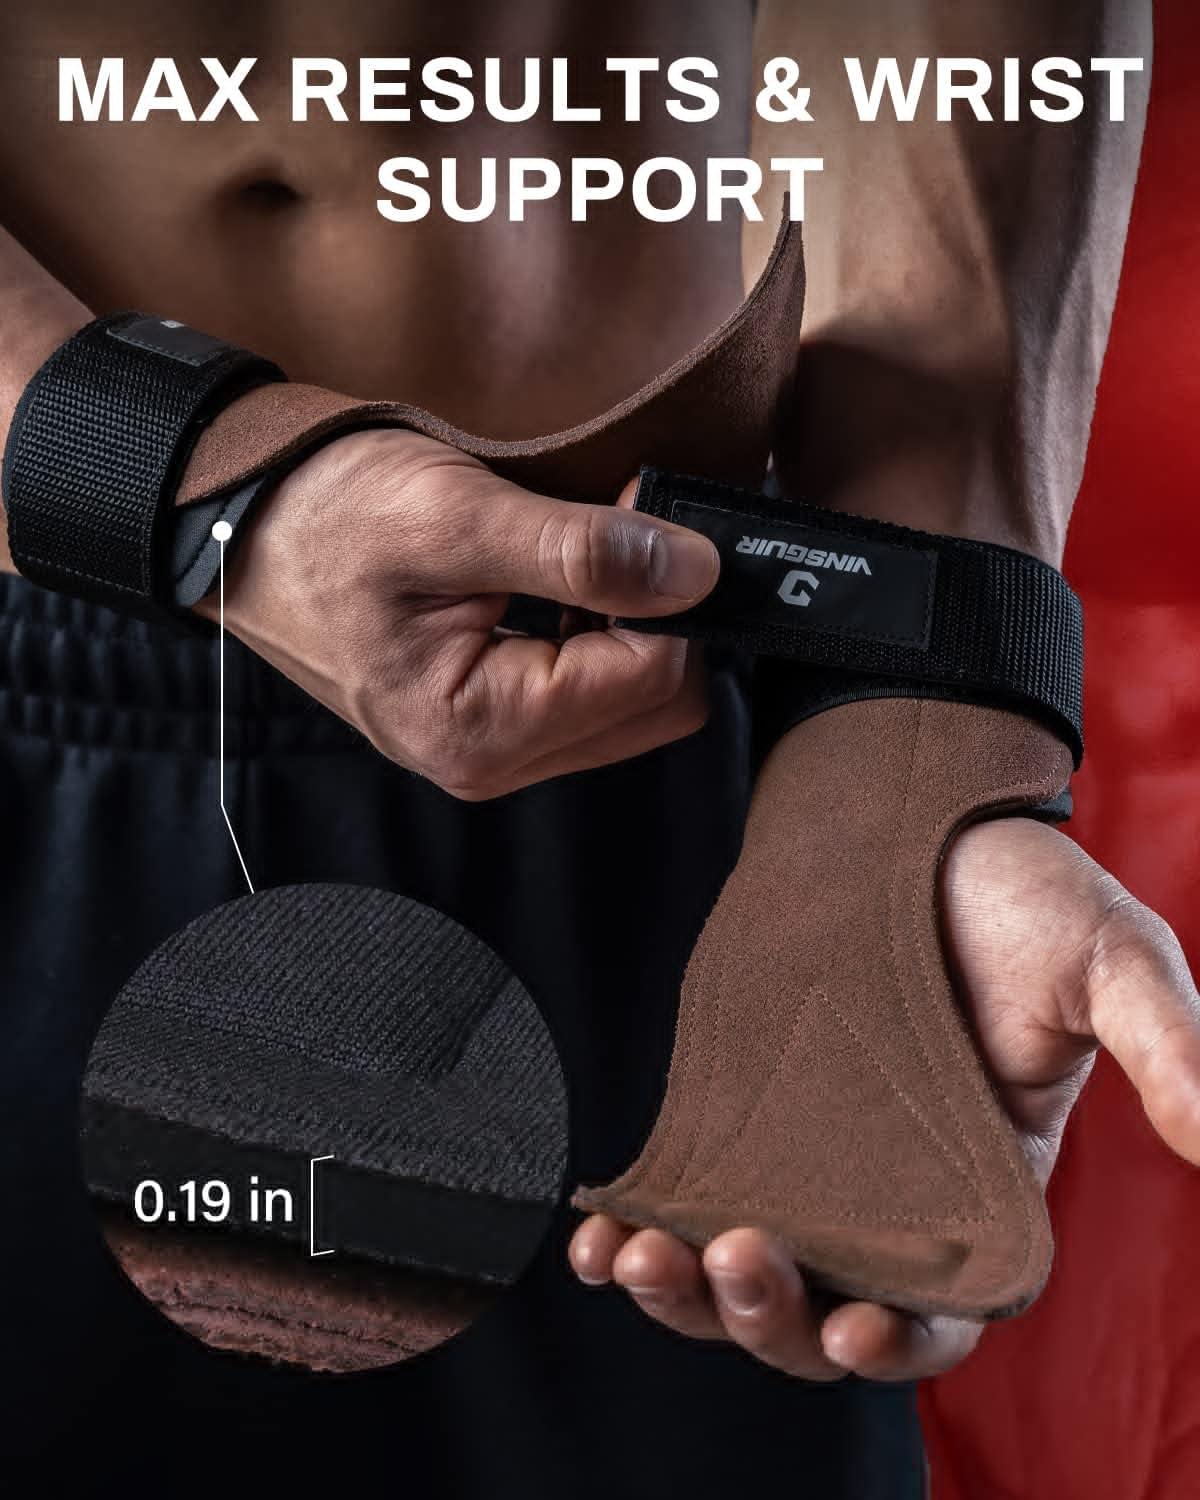 How to Use Weightlifting Wrist Straps for Wrist Support When